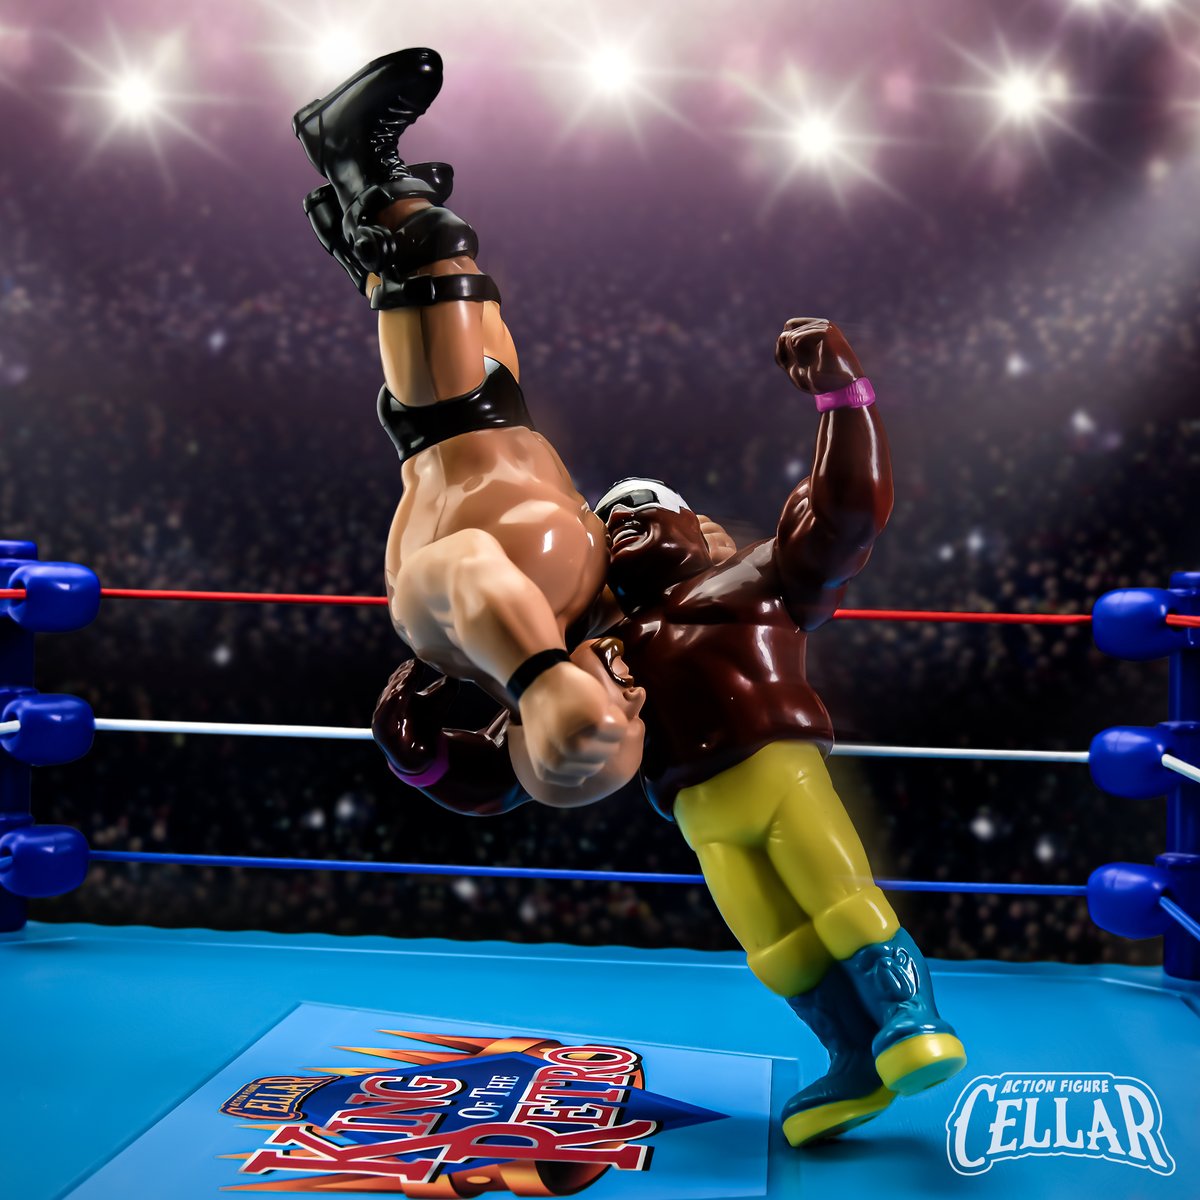 The winner is KOKO B. WARE... Koko hits Steve with a flurry of dropkicks and then a Ghostbuster to finish off a surprisingly unpopular Austin and move into the next round of the toynament

Votes counted across my socials
@steveaustinBSR 77 vs 32 #KokoBWare
 
#KingOfTheRetro #hWo